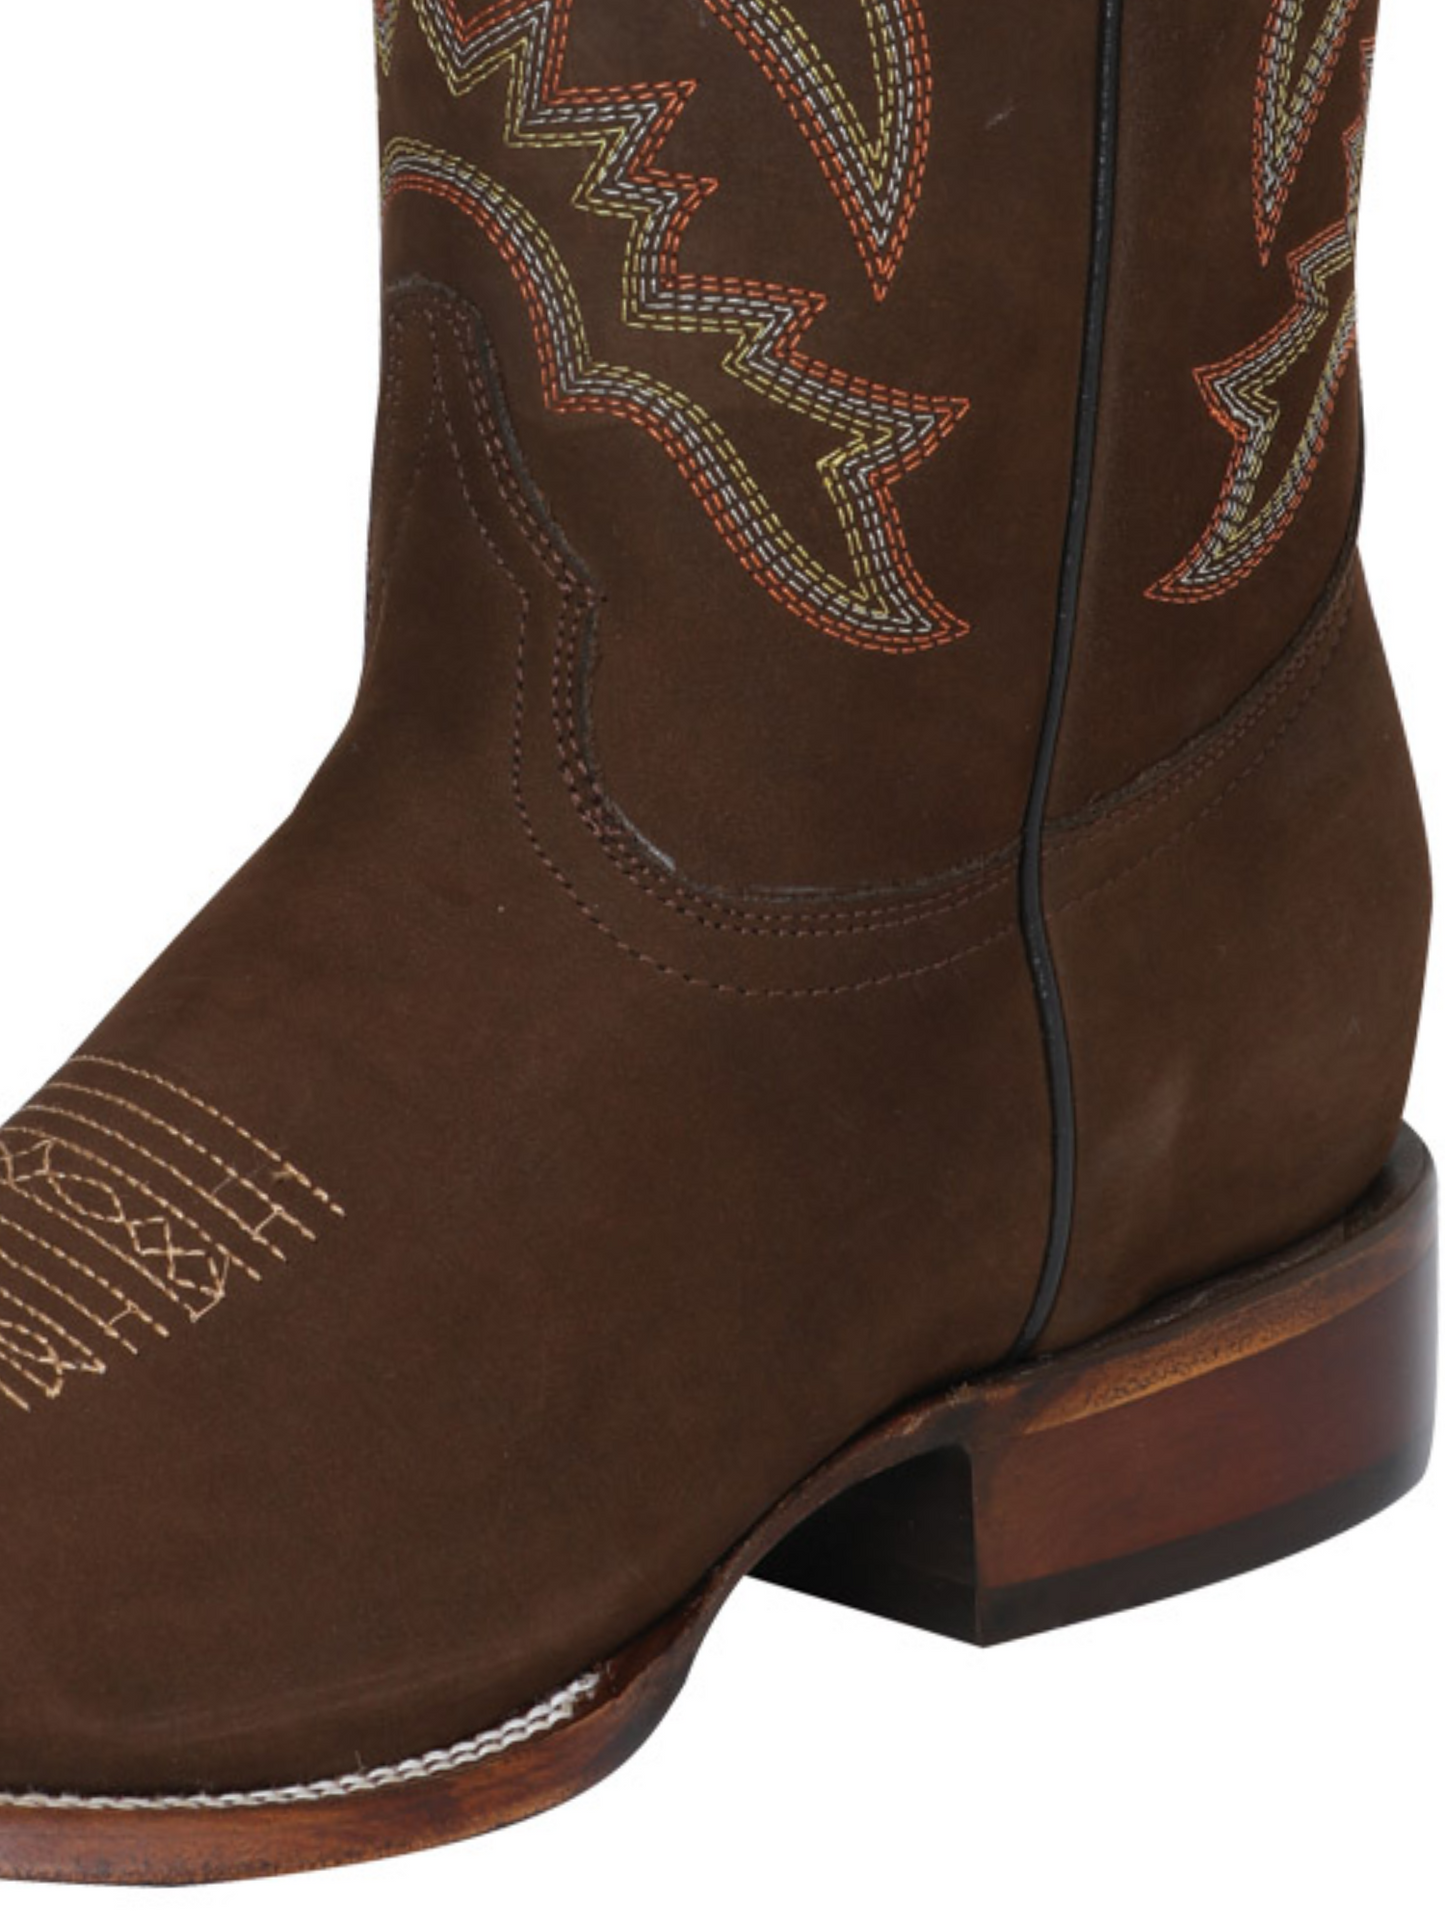 Classic Nobuck Leather Rodeo Cowboy Boots for Men 'The Lord of the Skies' - ID: 124065